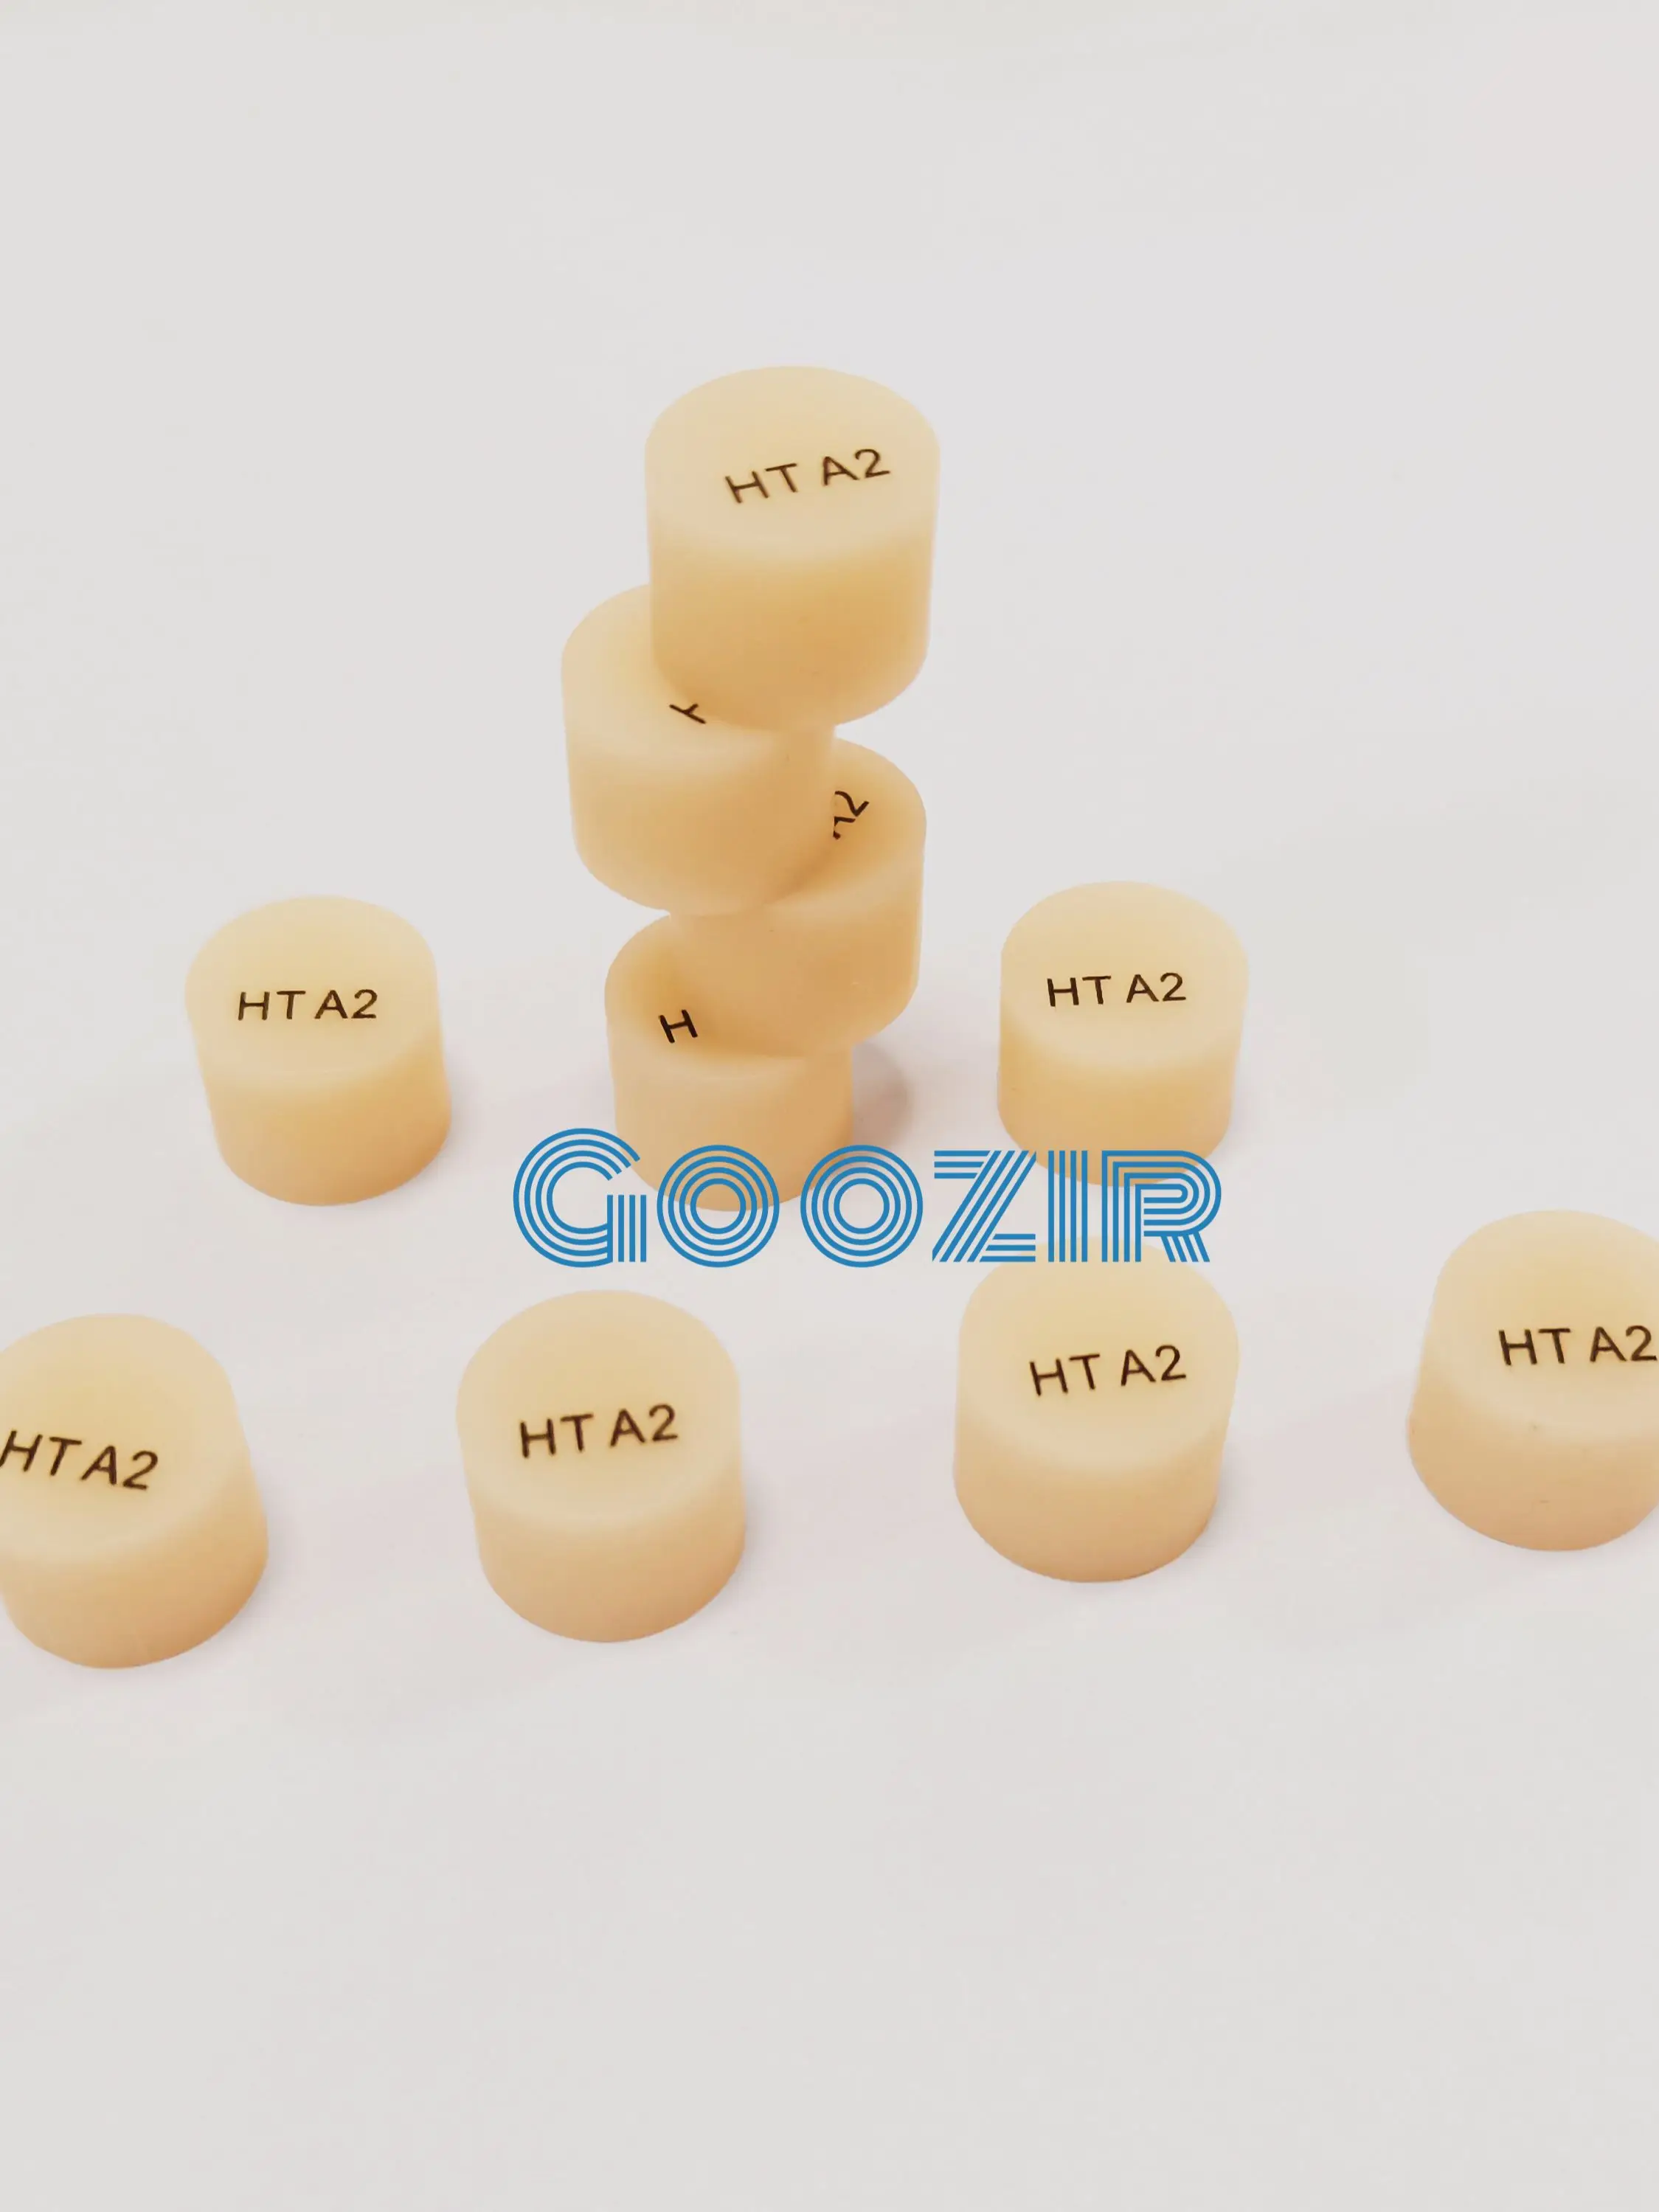 

High quality Lithium Disilicate press Ingots suitable for the fabrication of monolithic restorations HT 10 pieces